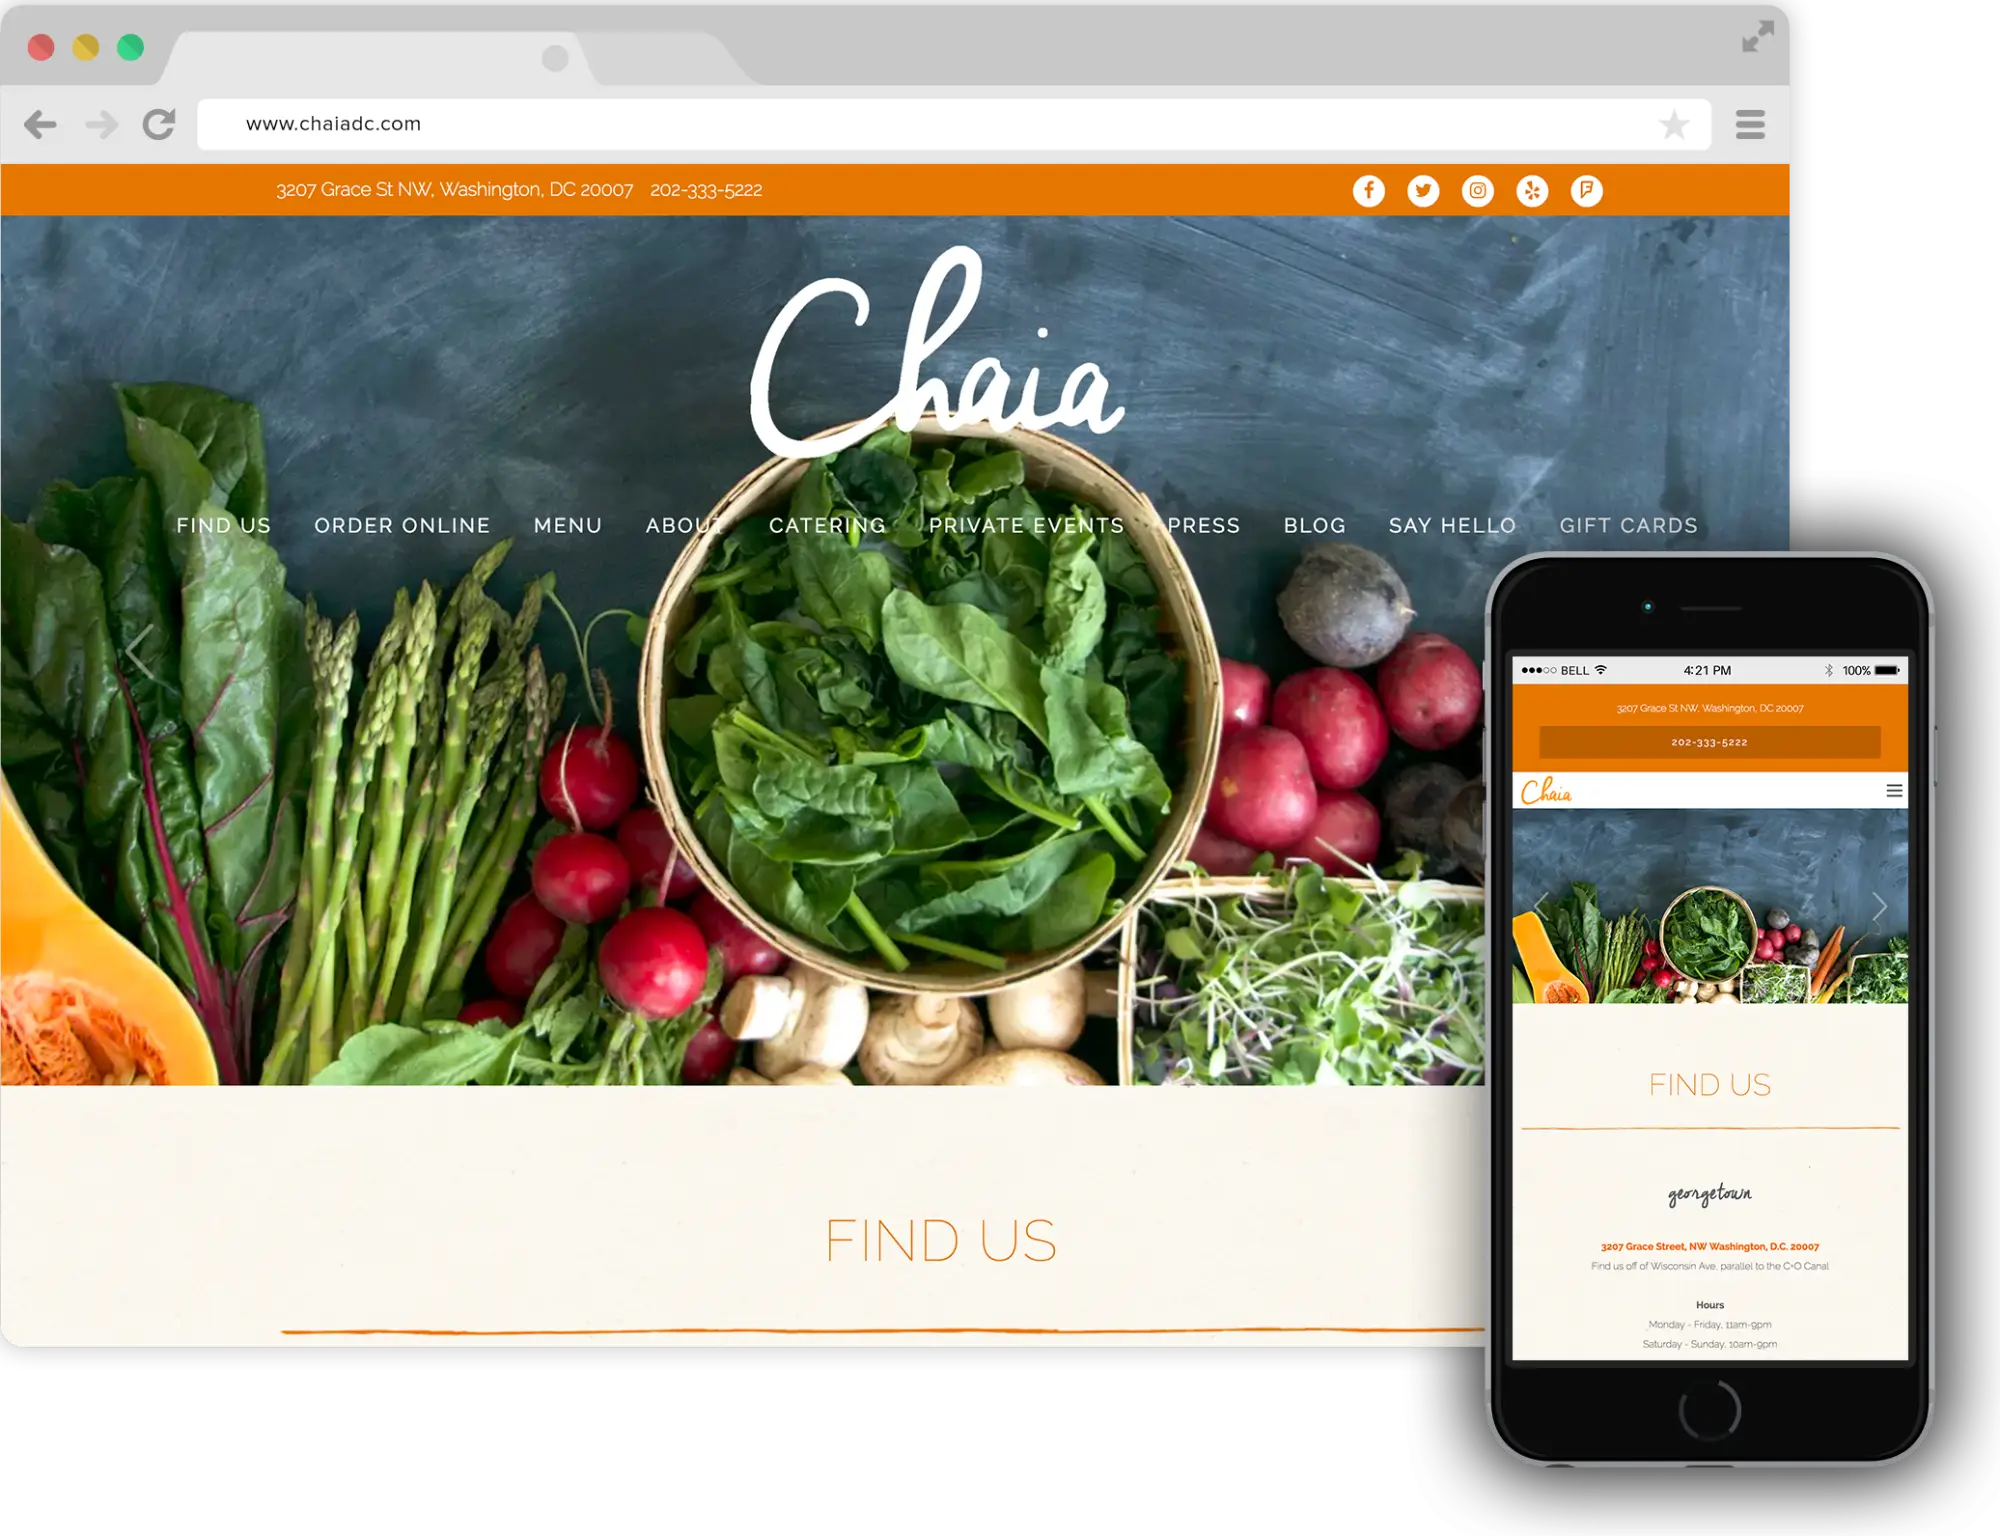 Chaia website